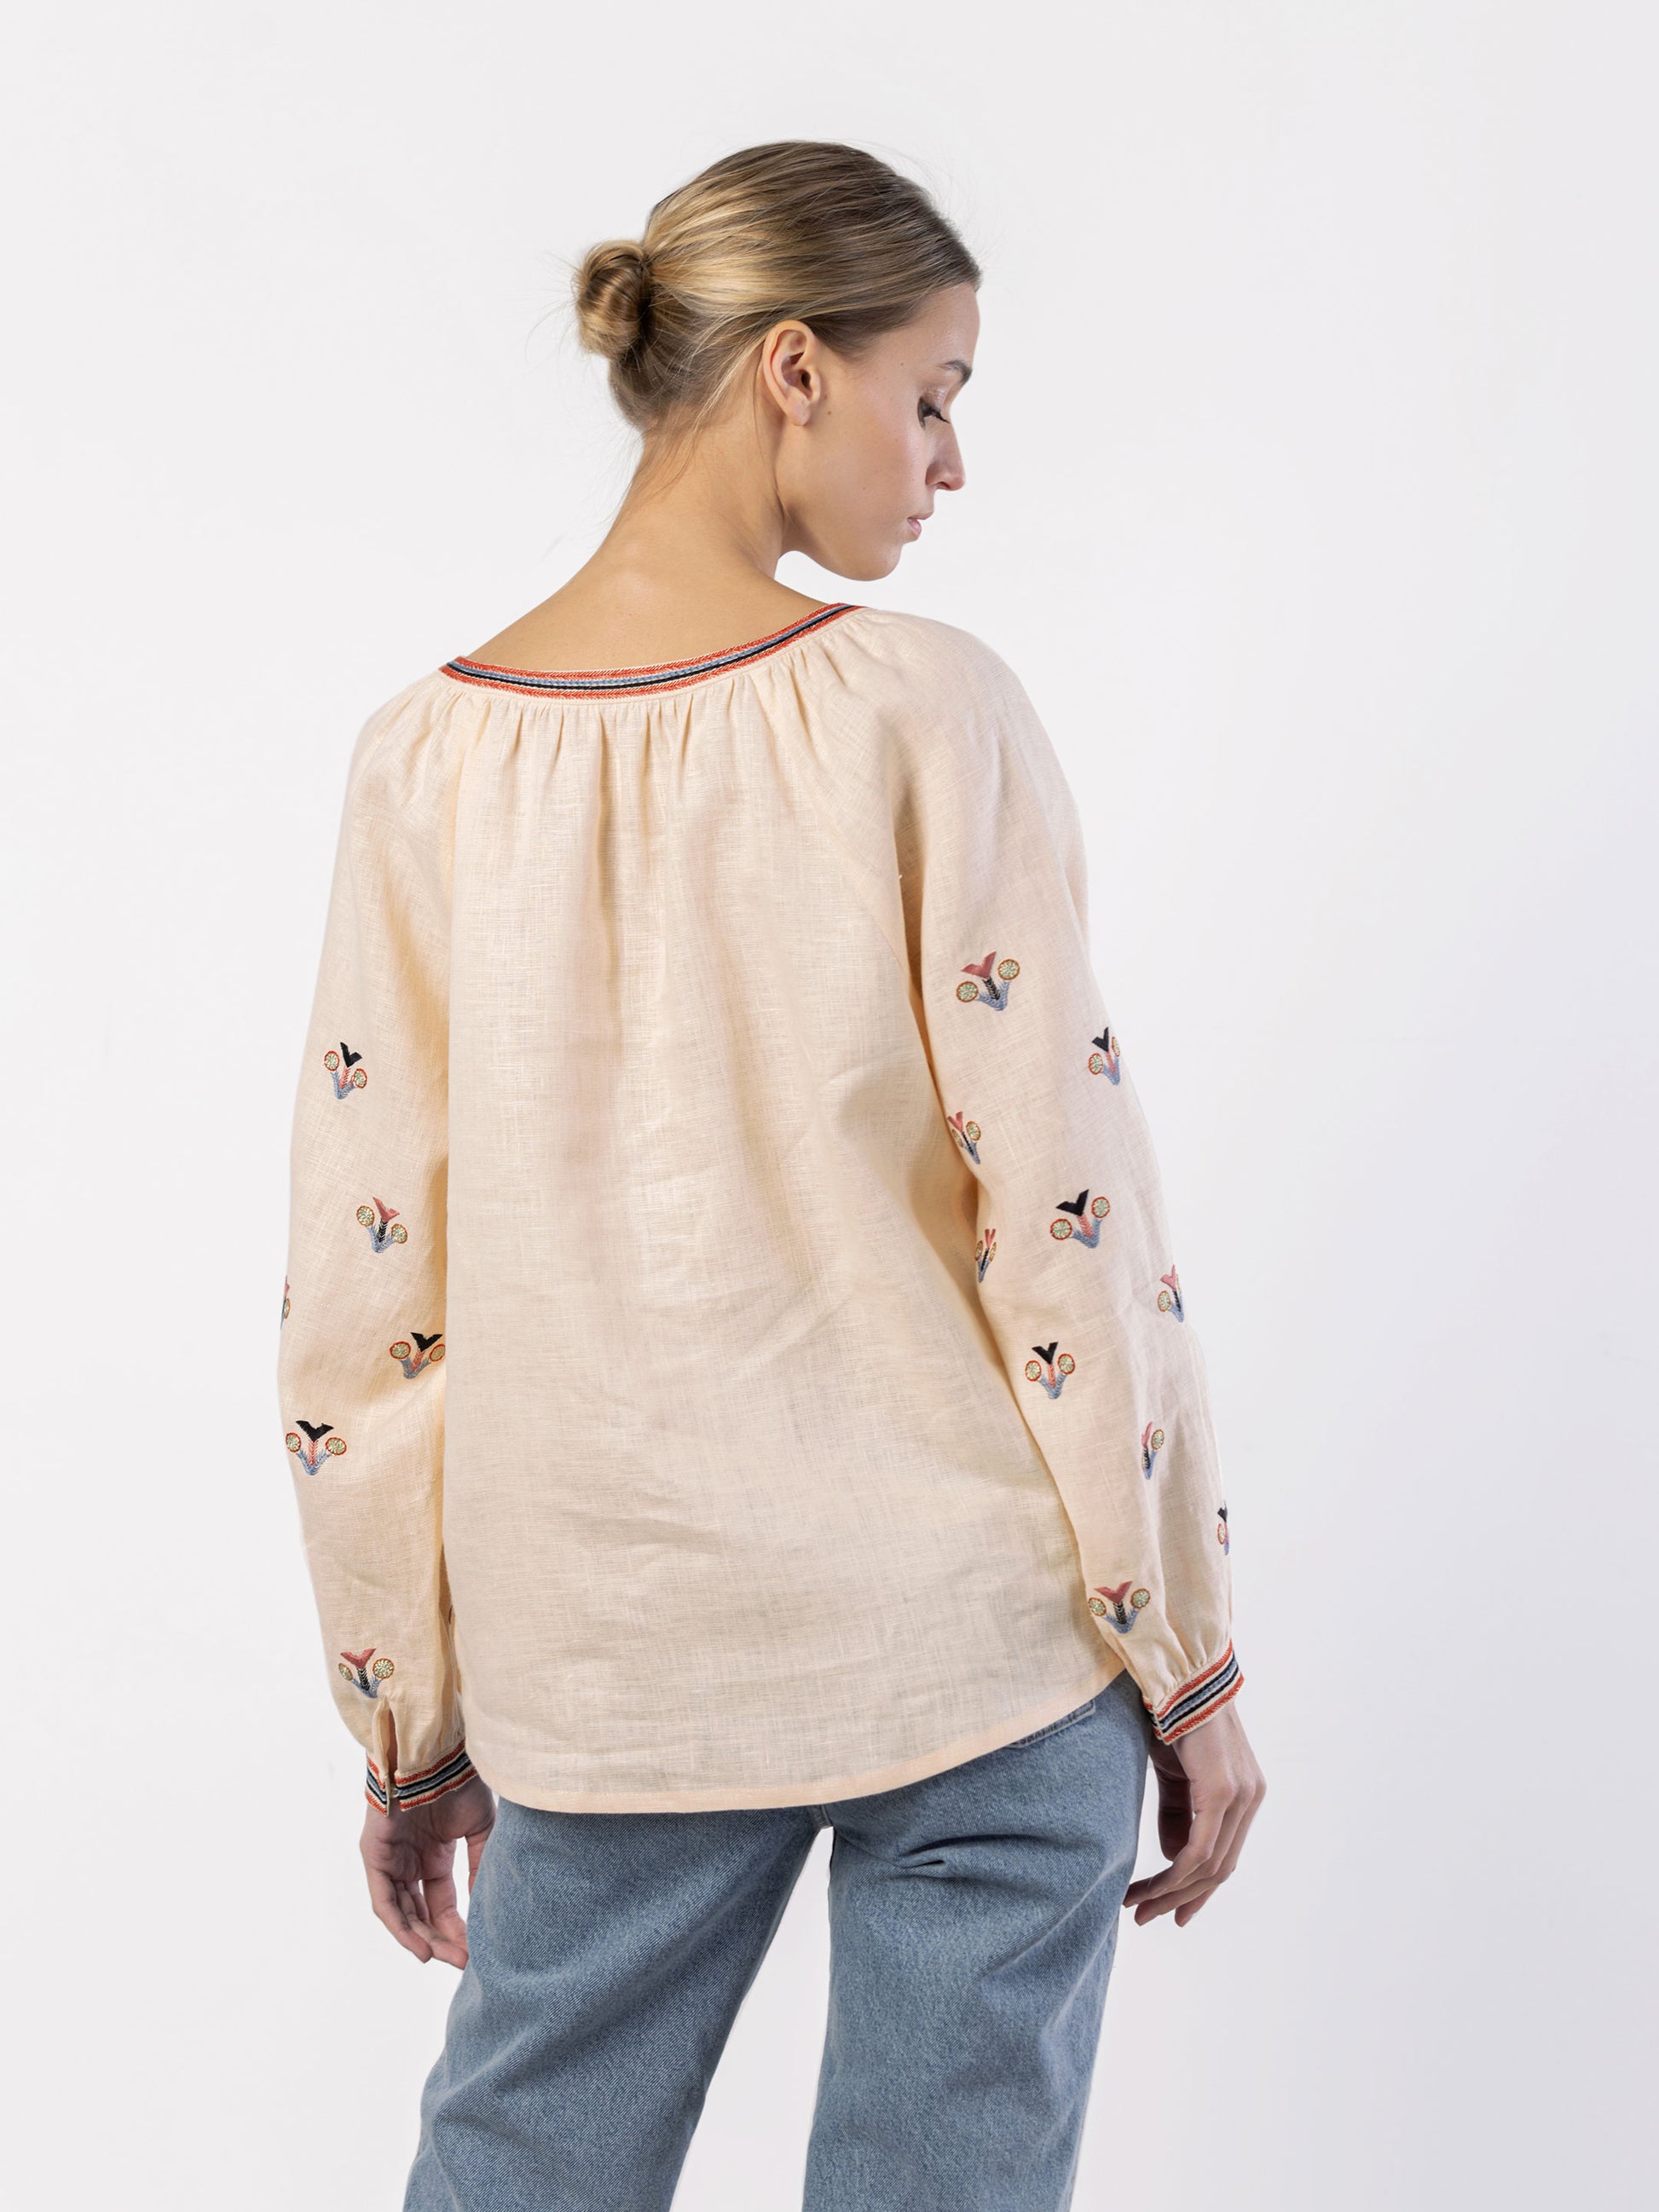 Embroidered shirt in boho style with white linen Bee